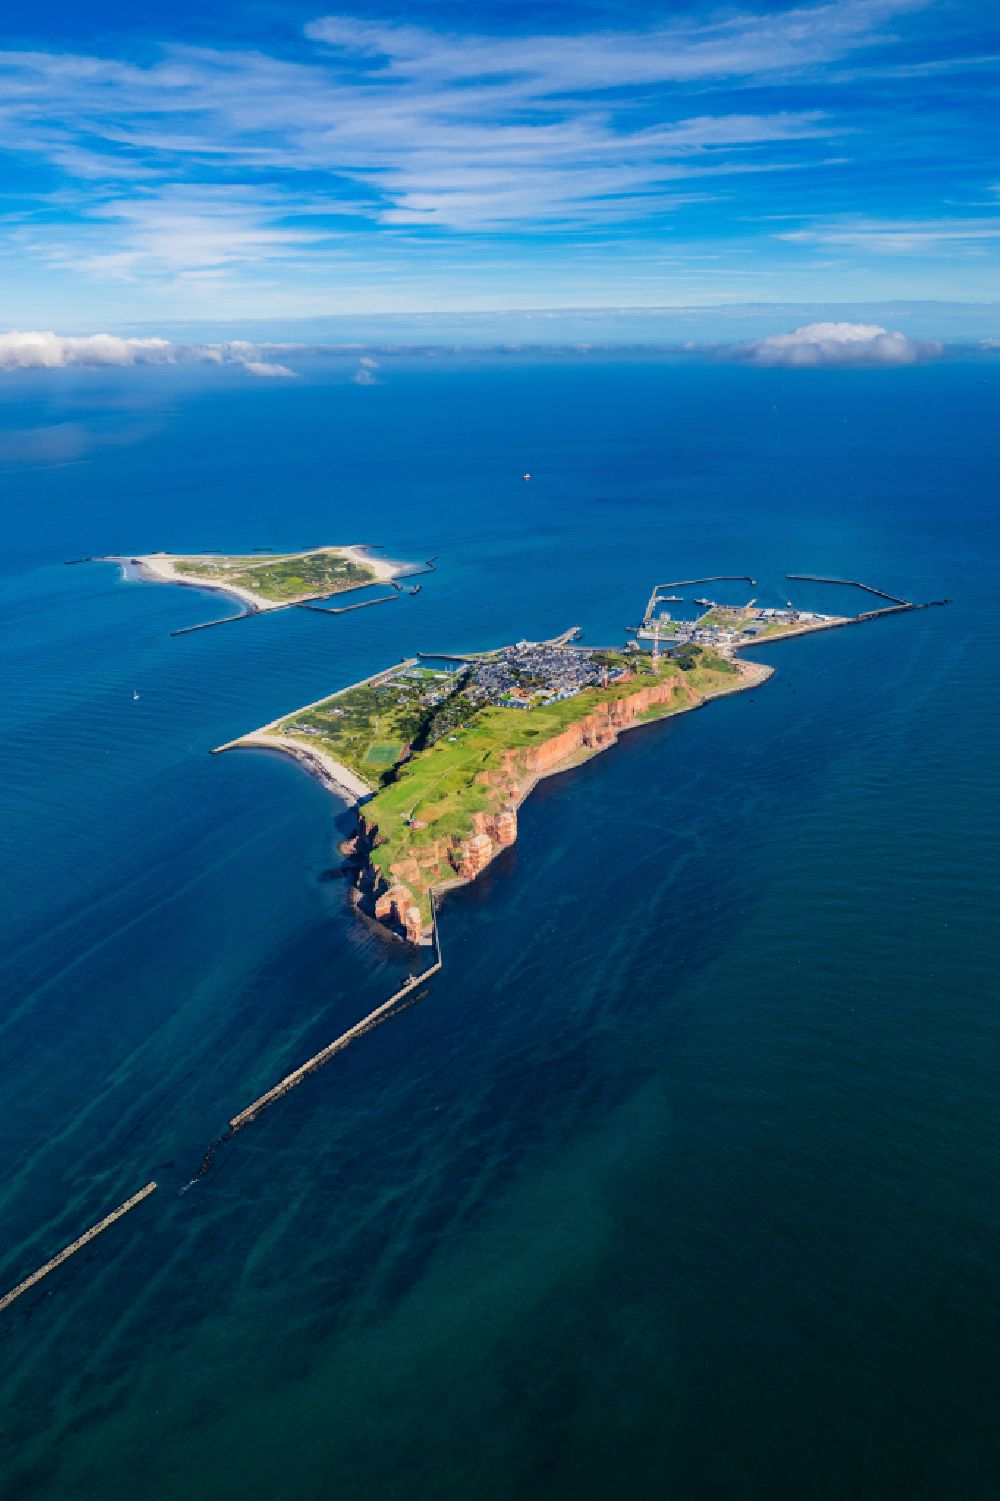 Helgoland from the bird's eye view: Coastal landscape of the island of Helgoland in the North Sea in the state of Schleswig-Holstein, Germany